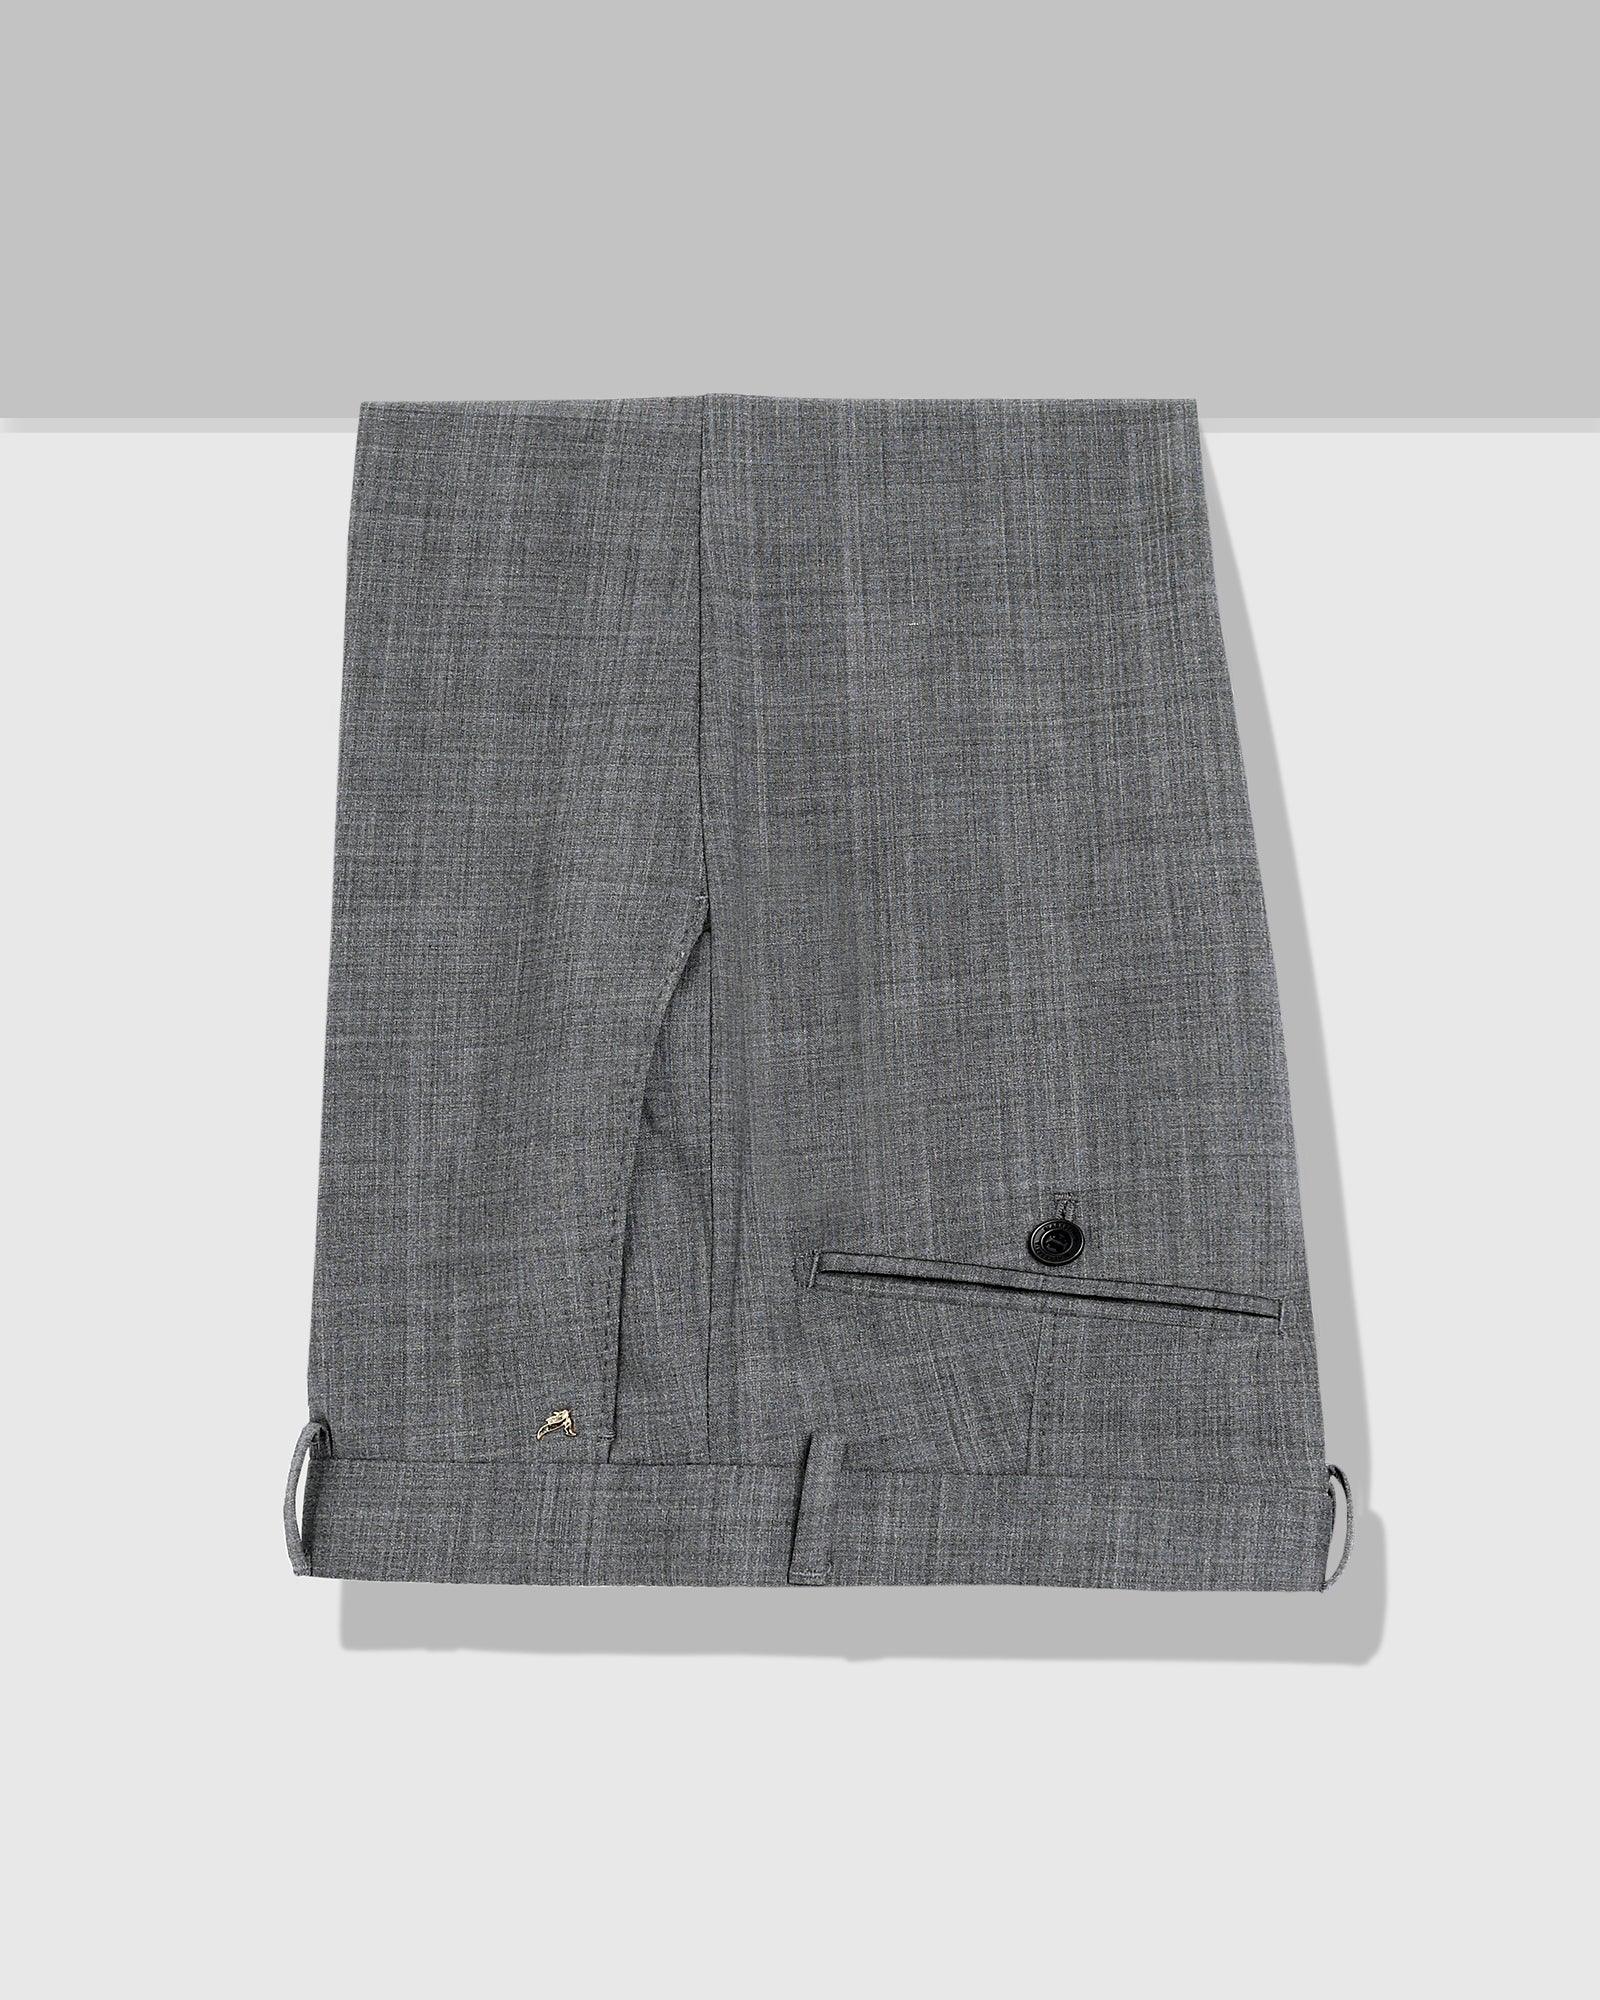 Luxe Slim Comfort B-95 Formal Grey Check Trouser - Norm